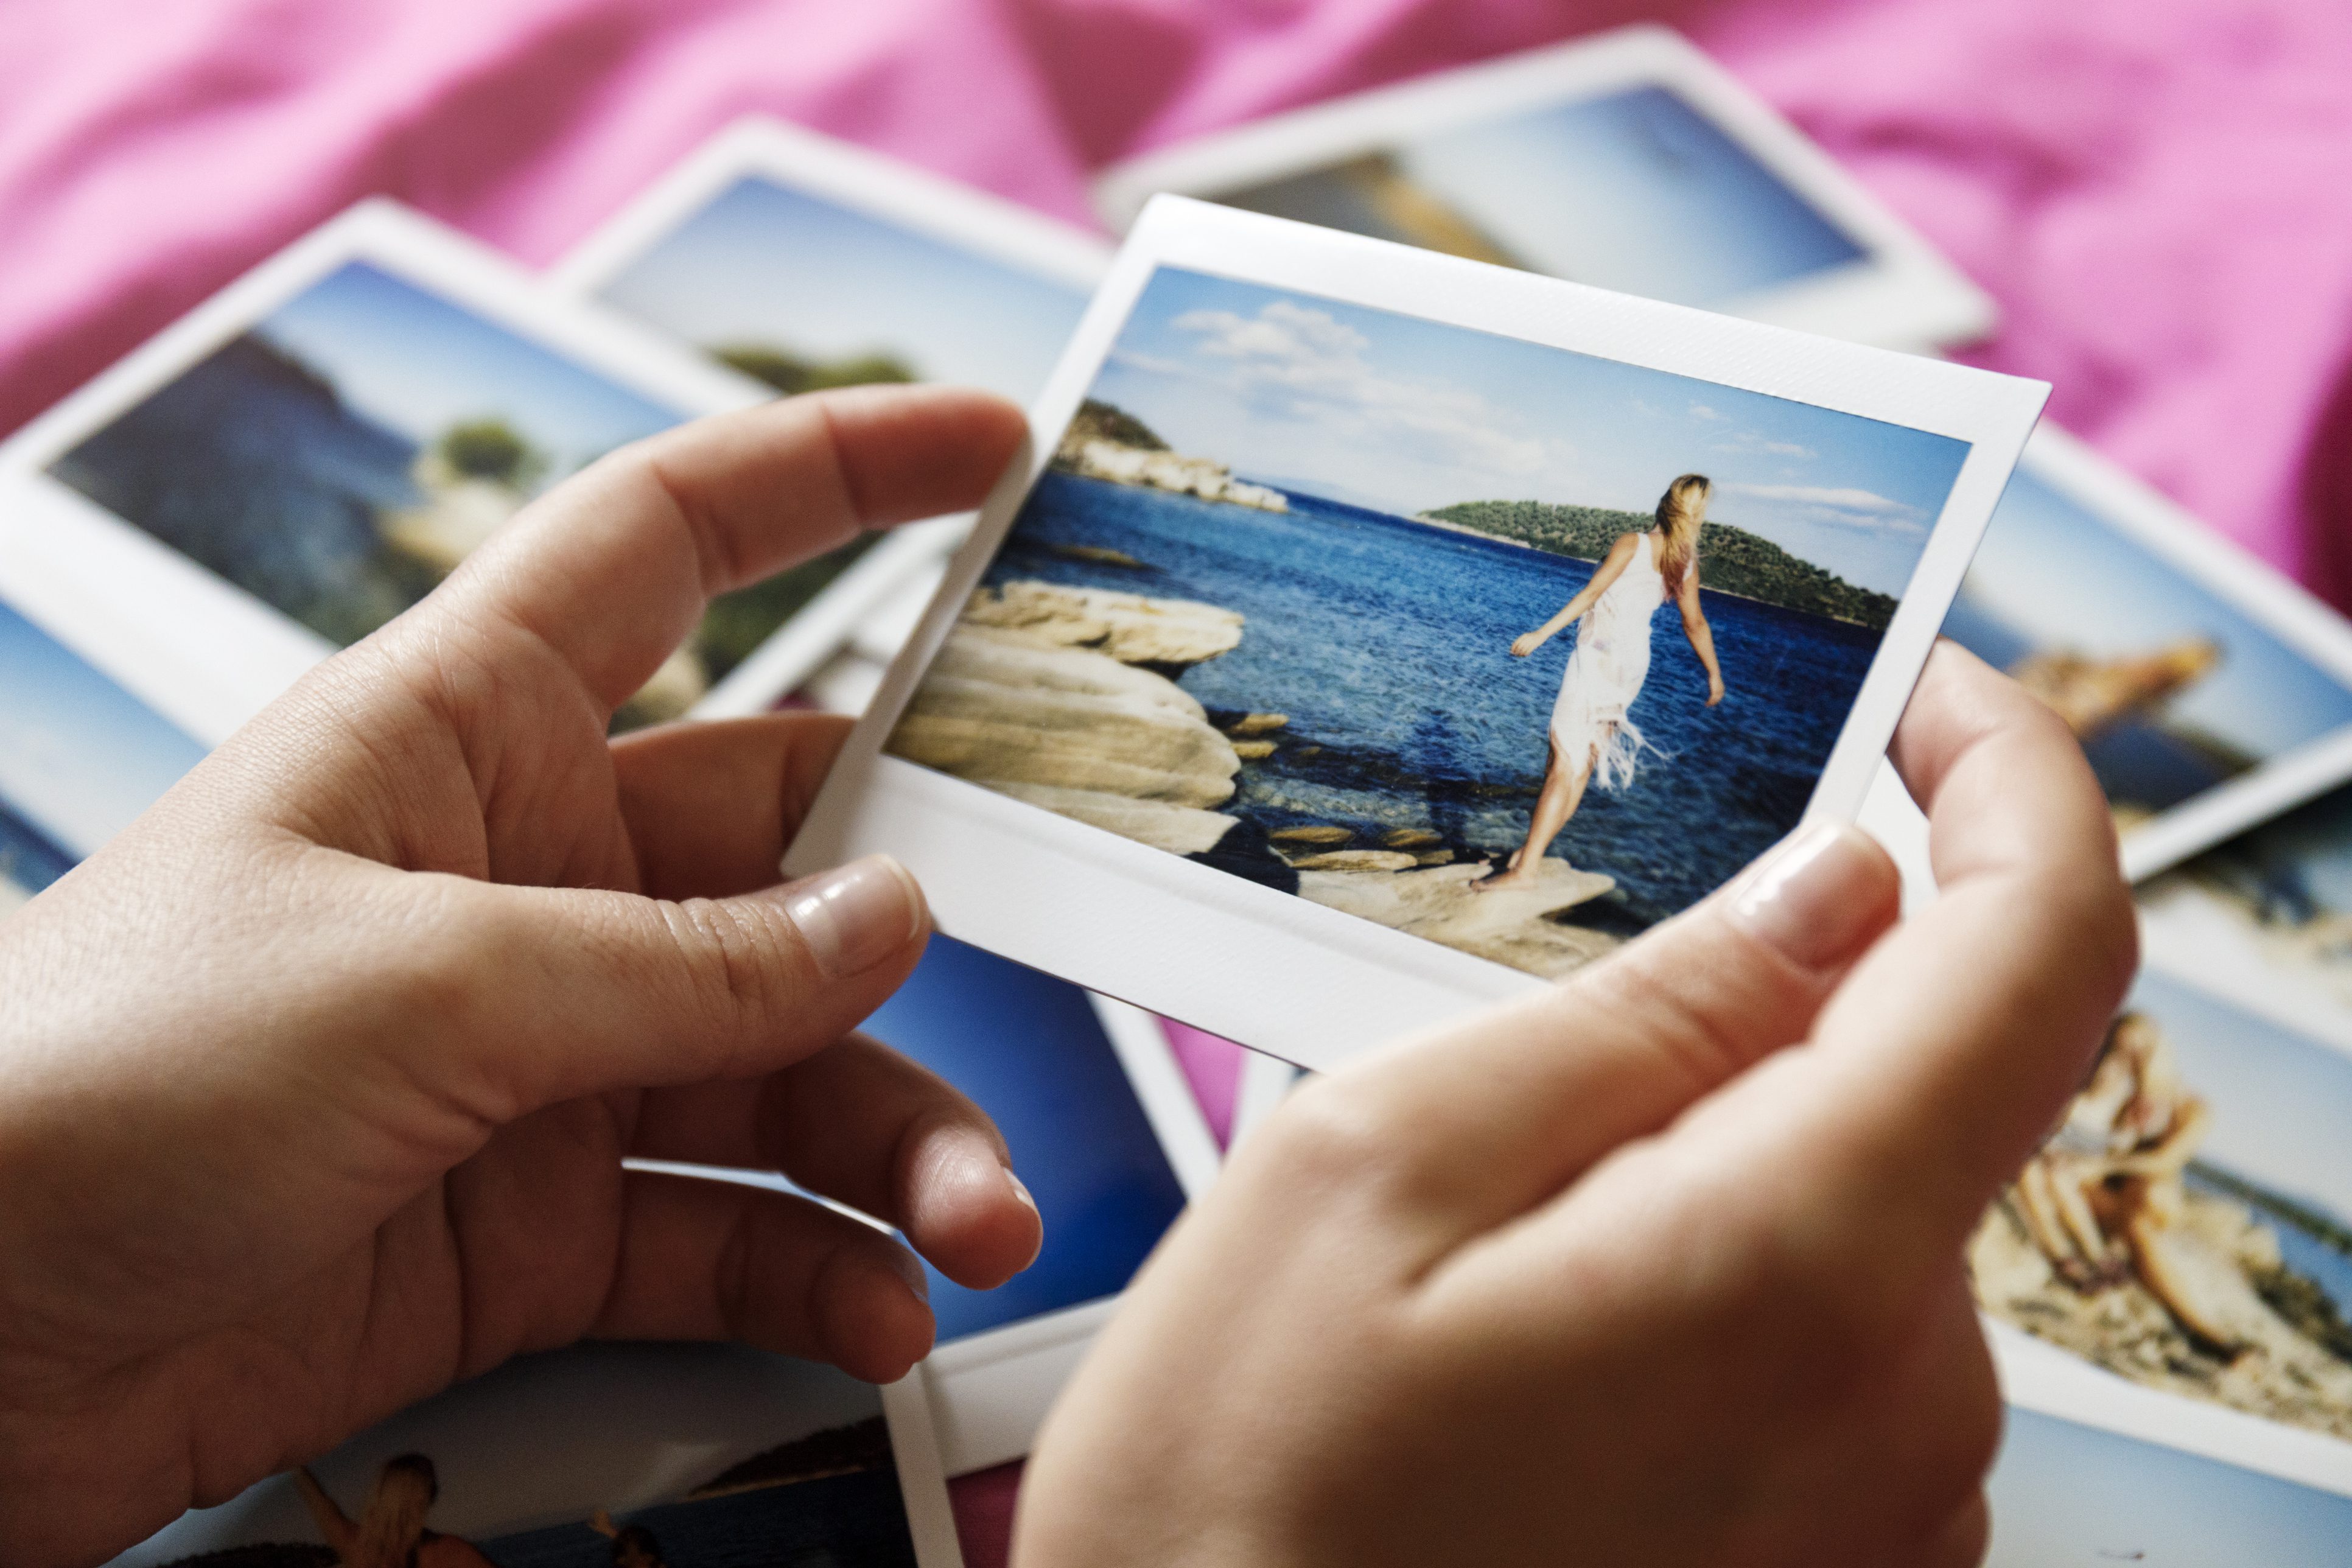 Online Dating: Is It Bad To Have Too Few Pictures?